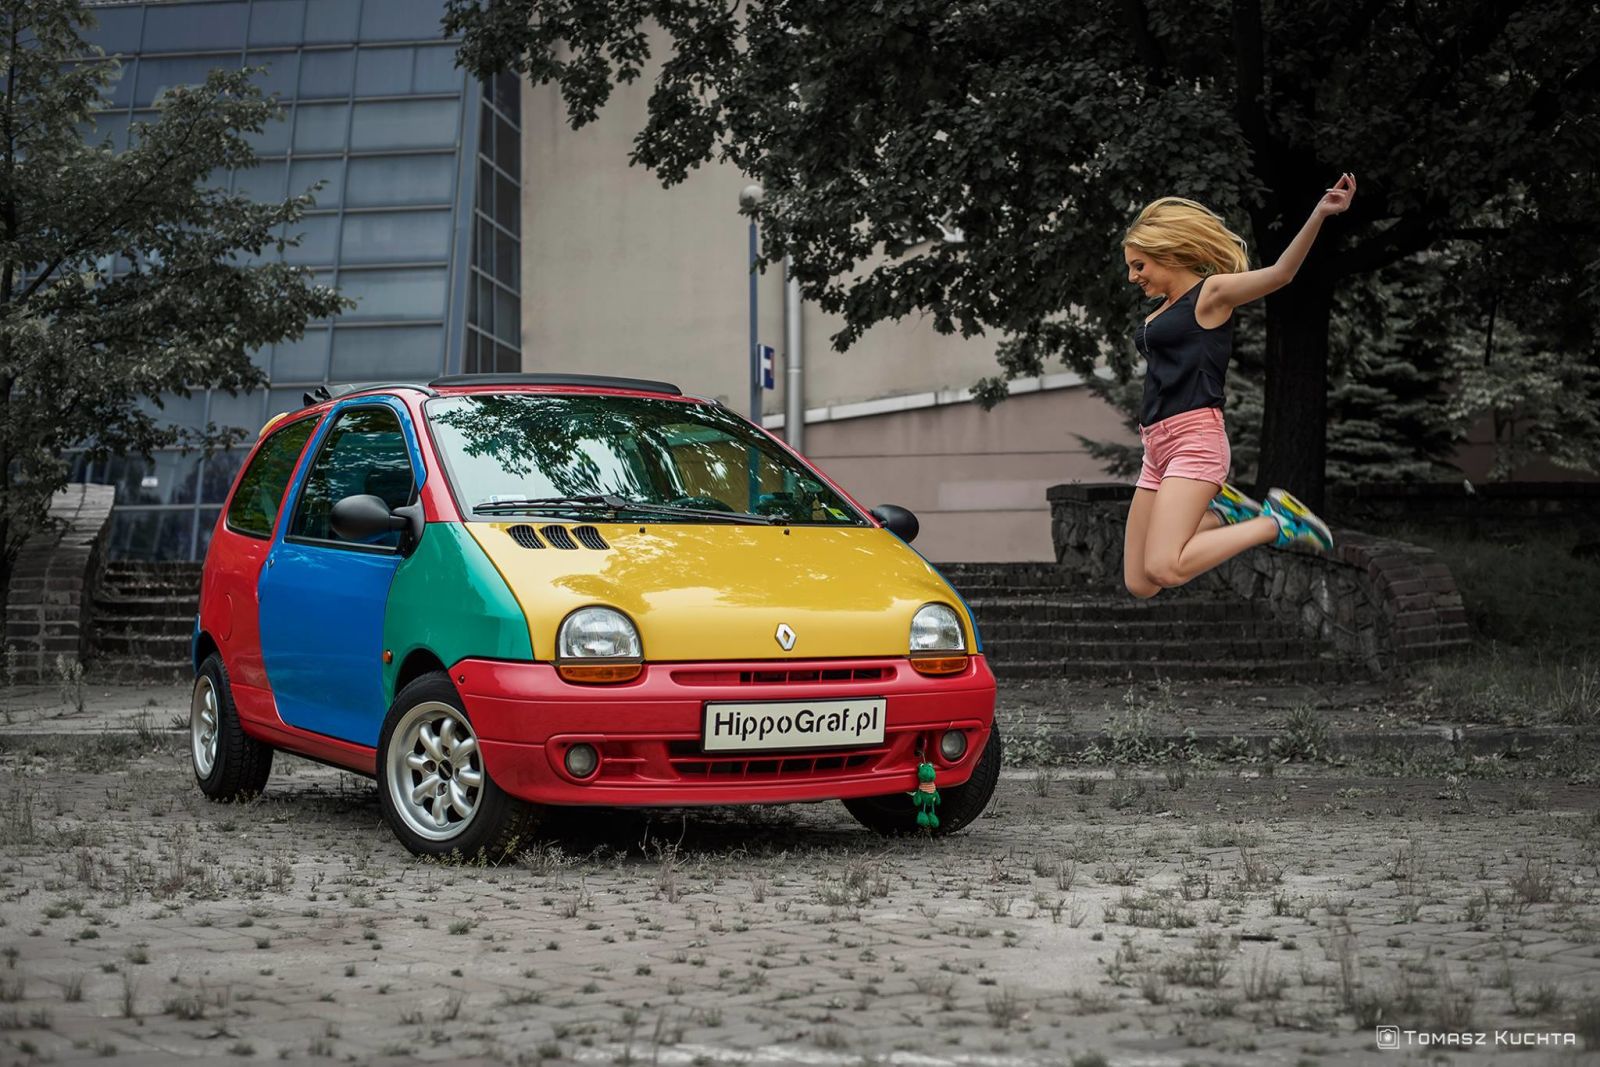 Illustration for article titled Youve heard of the Harlequin Golf, but what about the Graffiti Twingo?